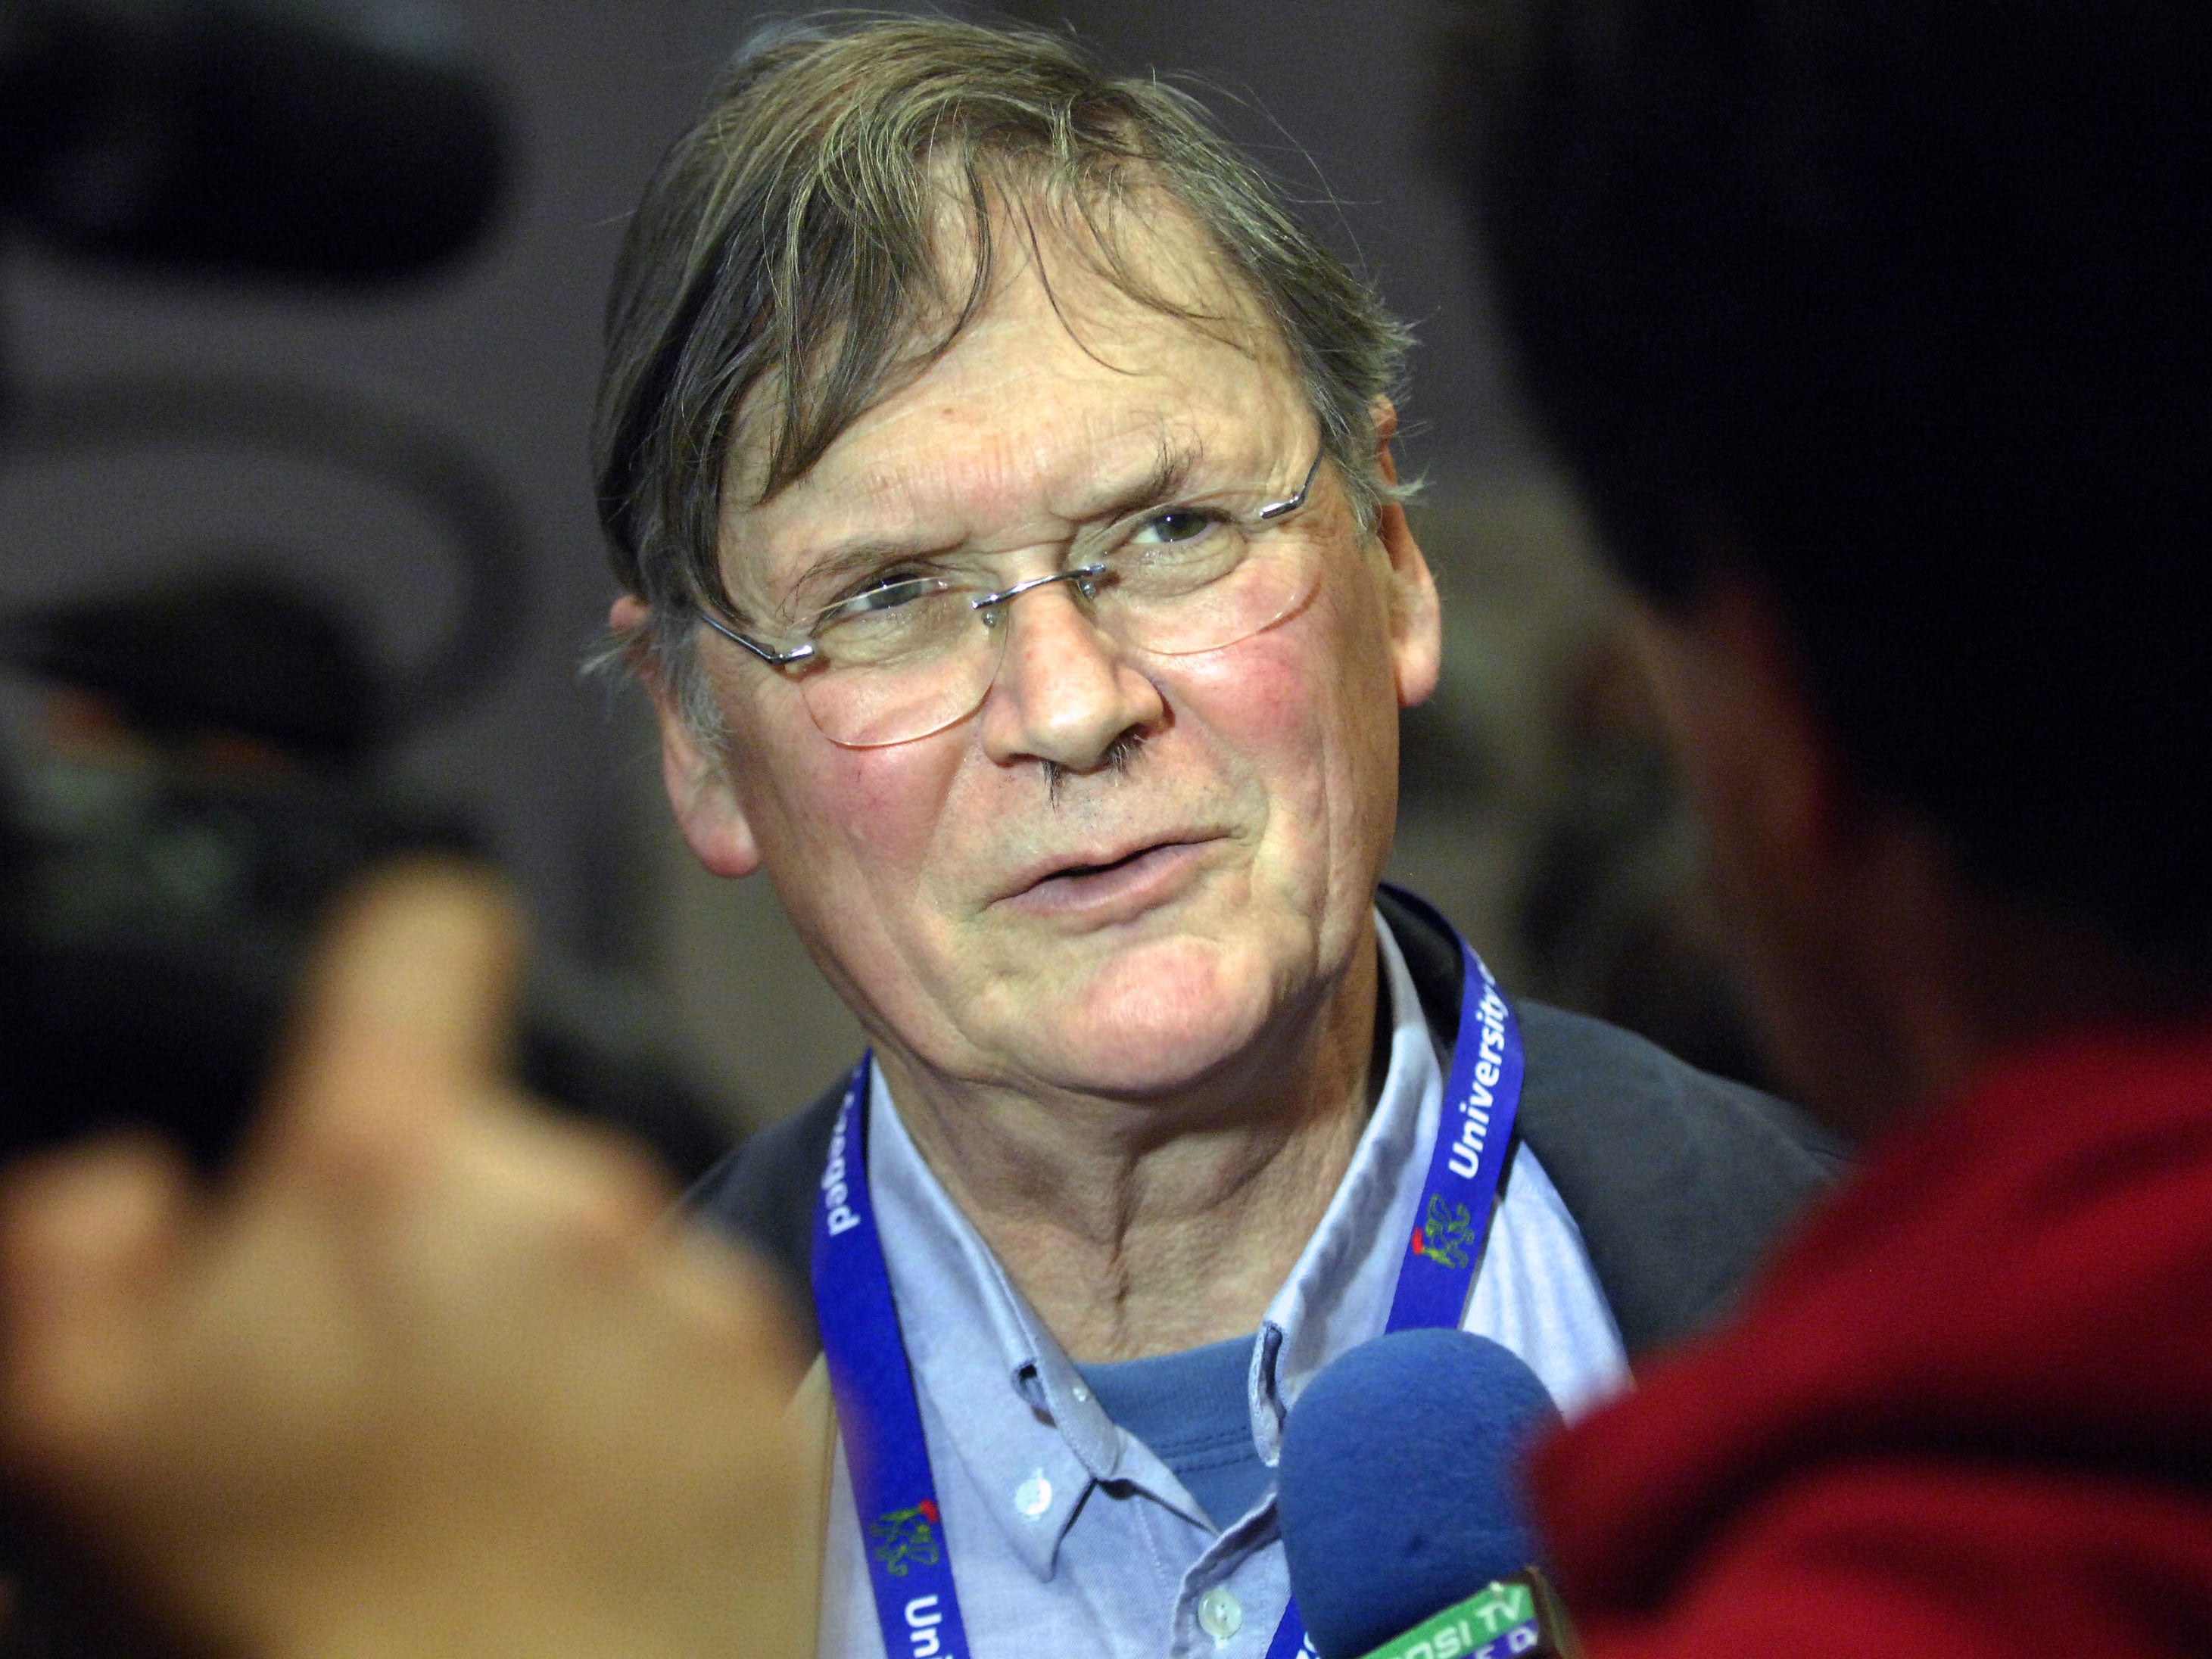 Sir Tim Hunt made the remarks about women in science at a science journalist conference in South Korea.